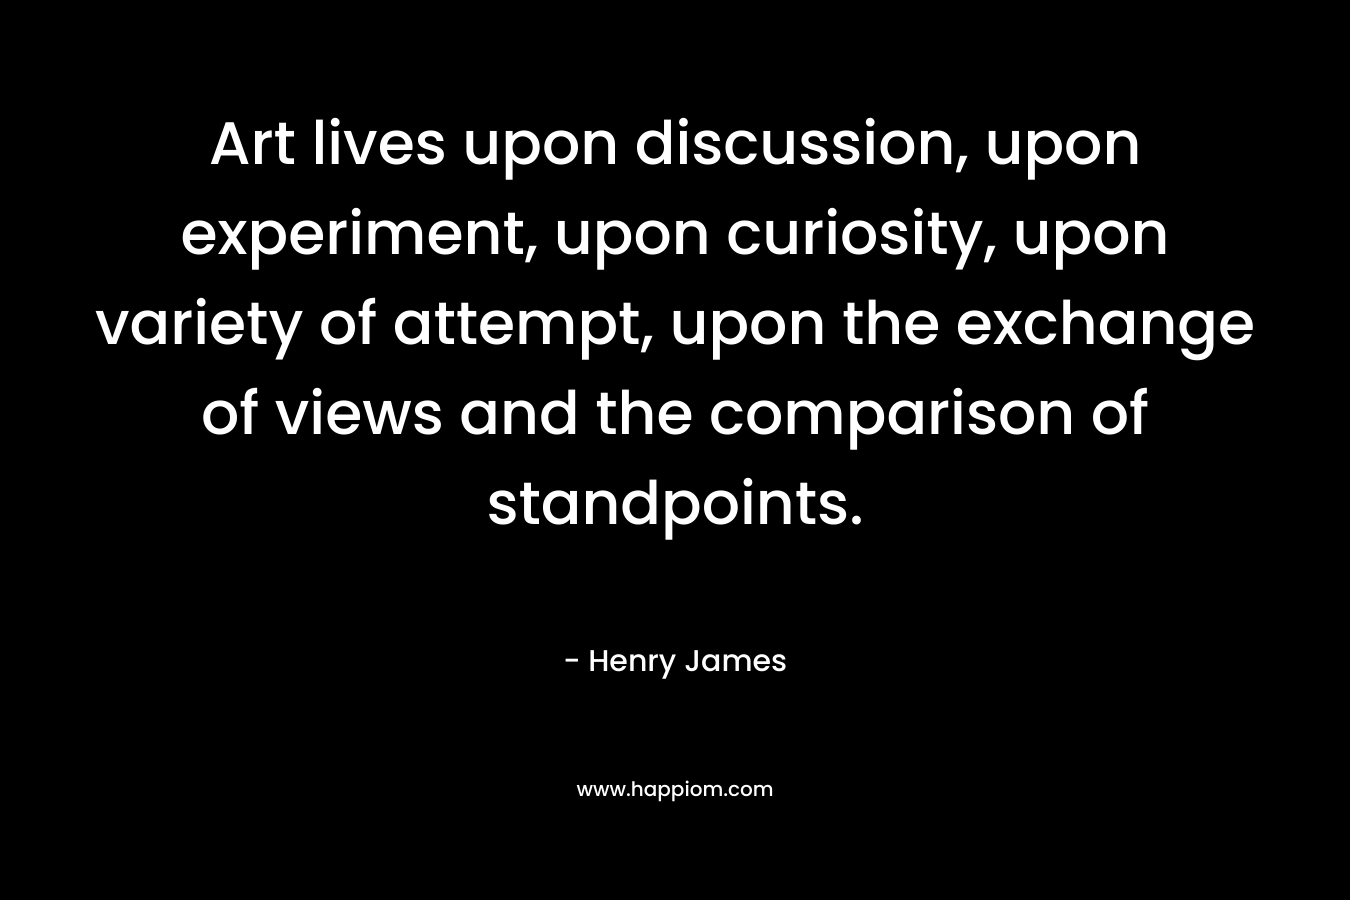 Art lives upon discussion, upon experiment, upon curiosity, upon variety of attempt, upon the exchange of views and the comparison of standpoints. – Henry James